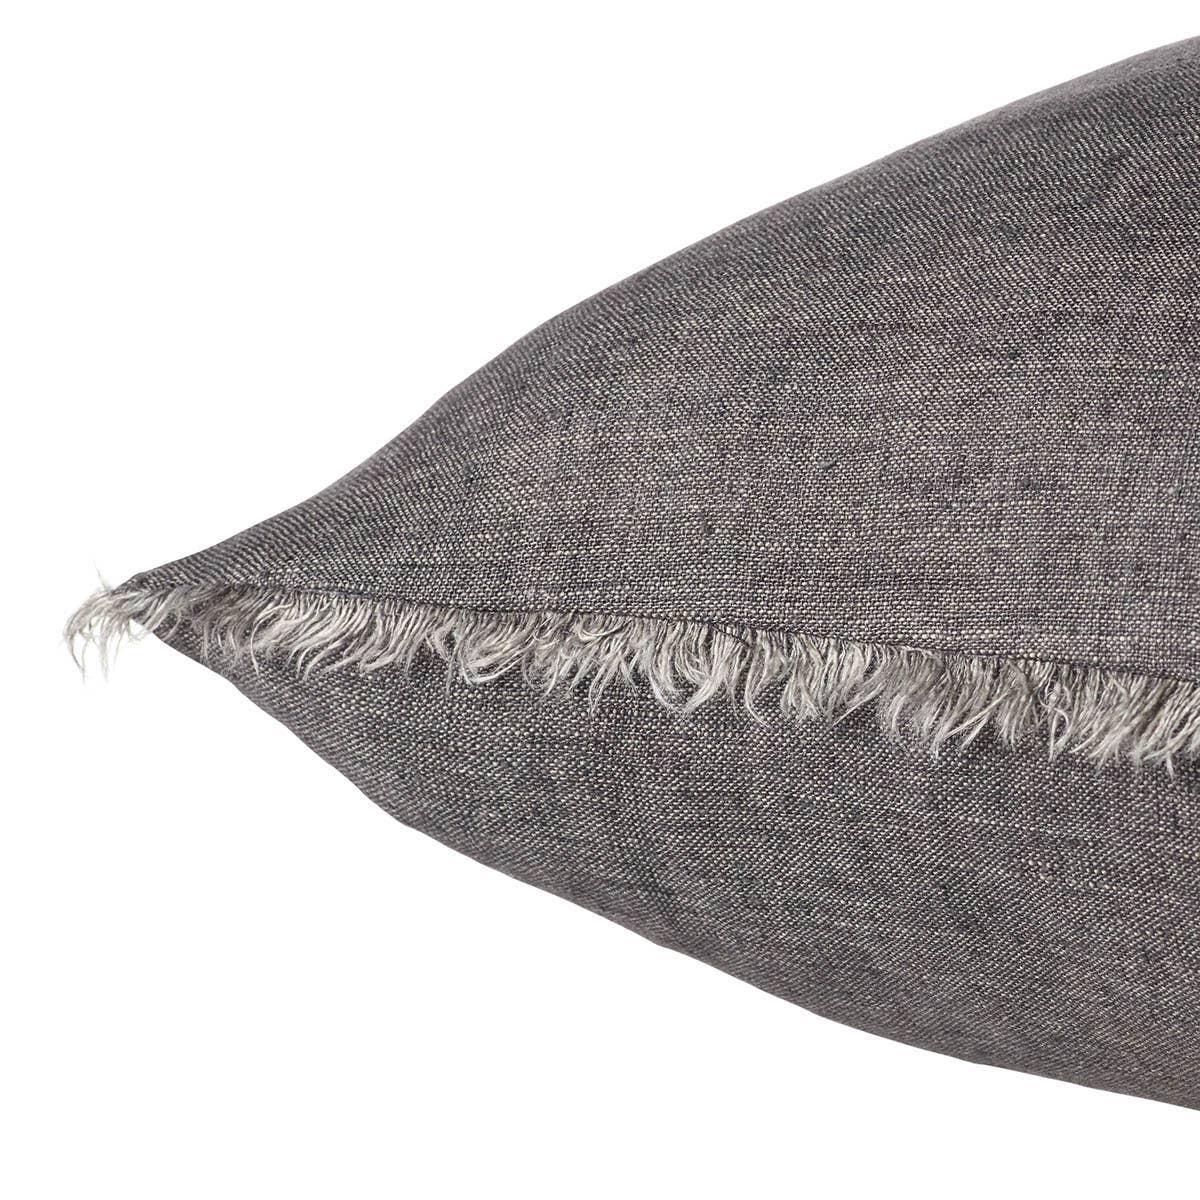 Linen is a fiber that takes on a soft beauty the more it is washed and worn ? its beauty is shaped by daily life. The handmade Cassis pillow features a soft charcoal color and a natural fringe on all sides. The gentle texture brings subtle sophistication to any contemporary home.Indoor Pillow Amethyst Home provides interior design, new home construction design consulting, vintage area rugs, and lighting in the Houston metro area.